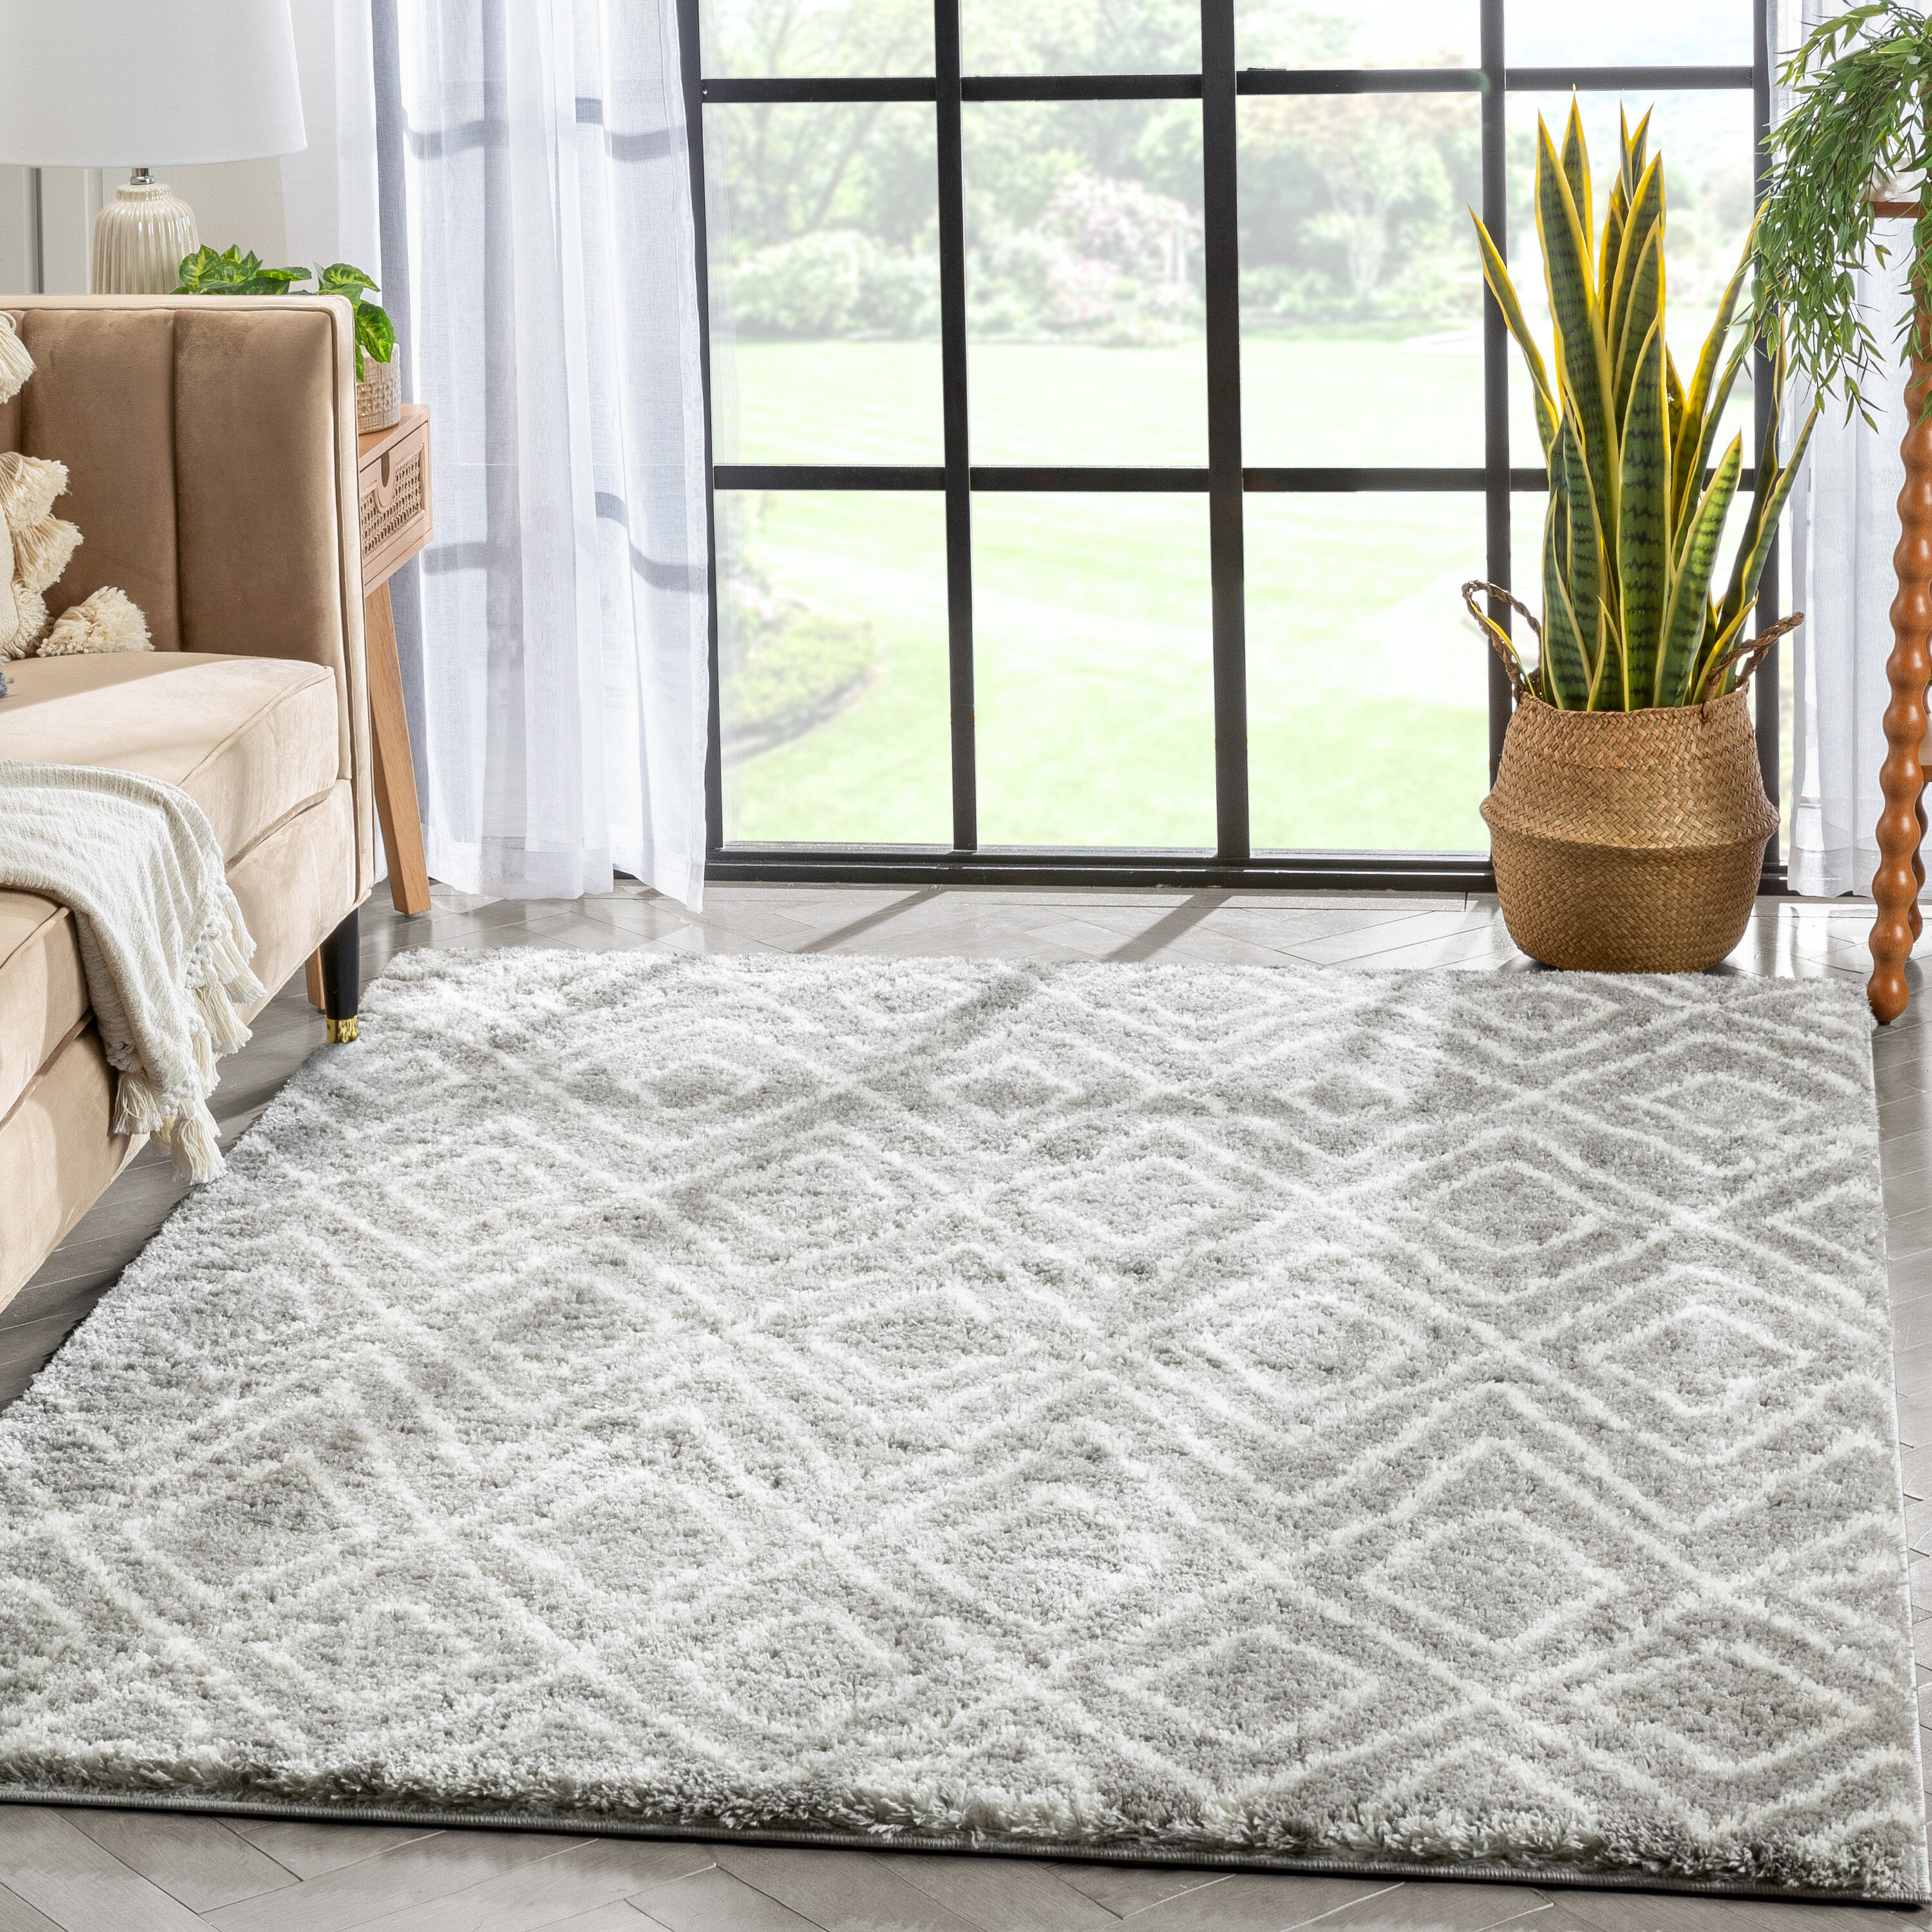 Stitch Area Rug Living Room, Stitch gift for fan Premium Rectangle Rug